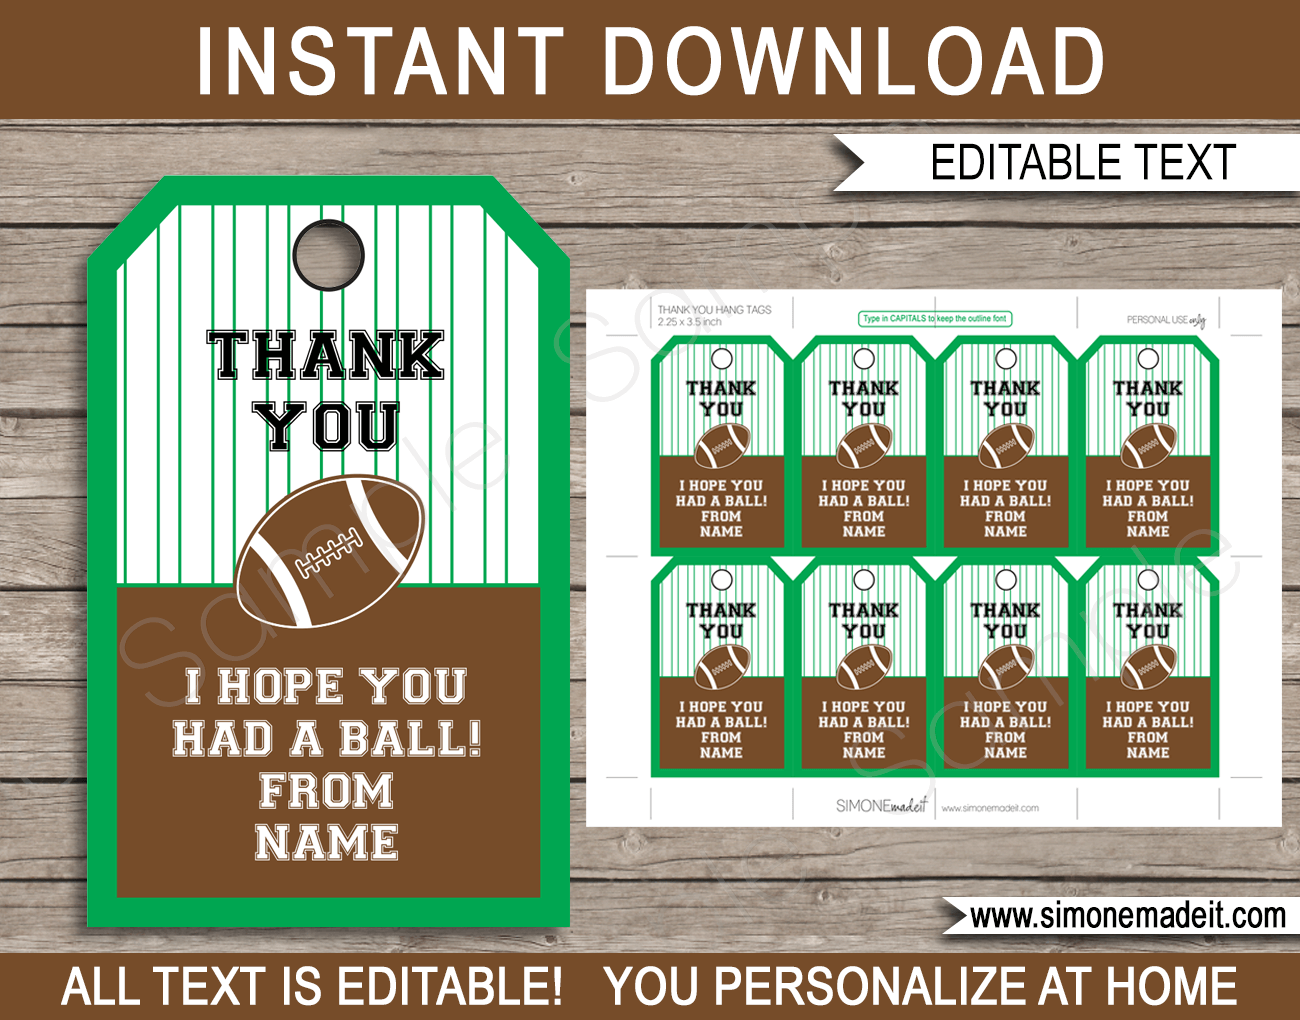 Football Party Favor Tags | Thank You Tags | Game Day | Birthday Party | Tailgate Party | Editable DIY Template | $3.00 INSTANT DOWNLOAD via SIMONEmadeit.com